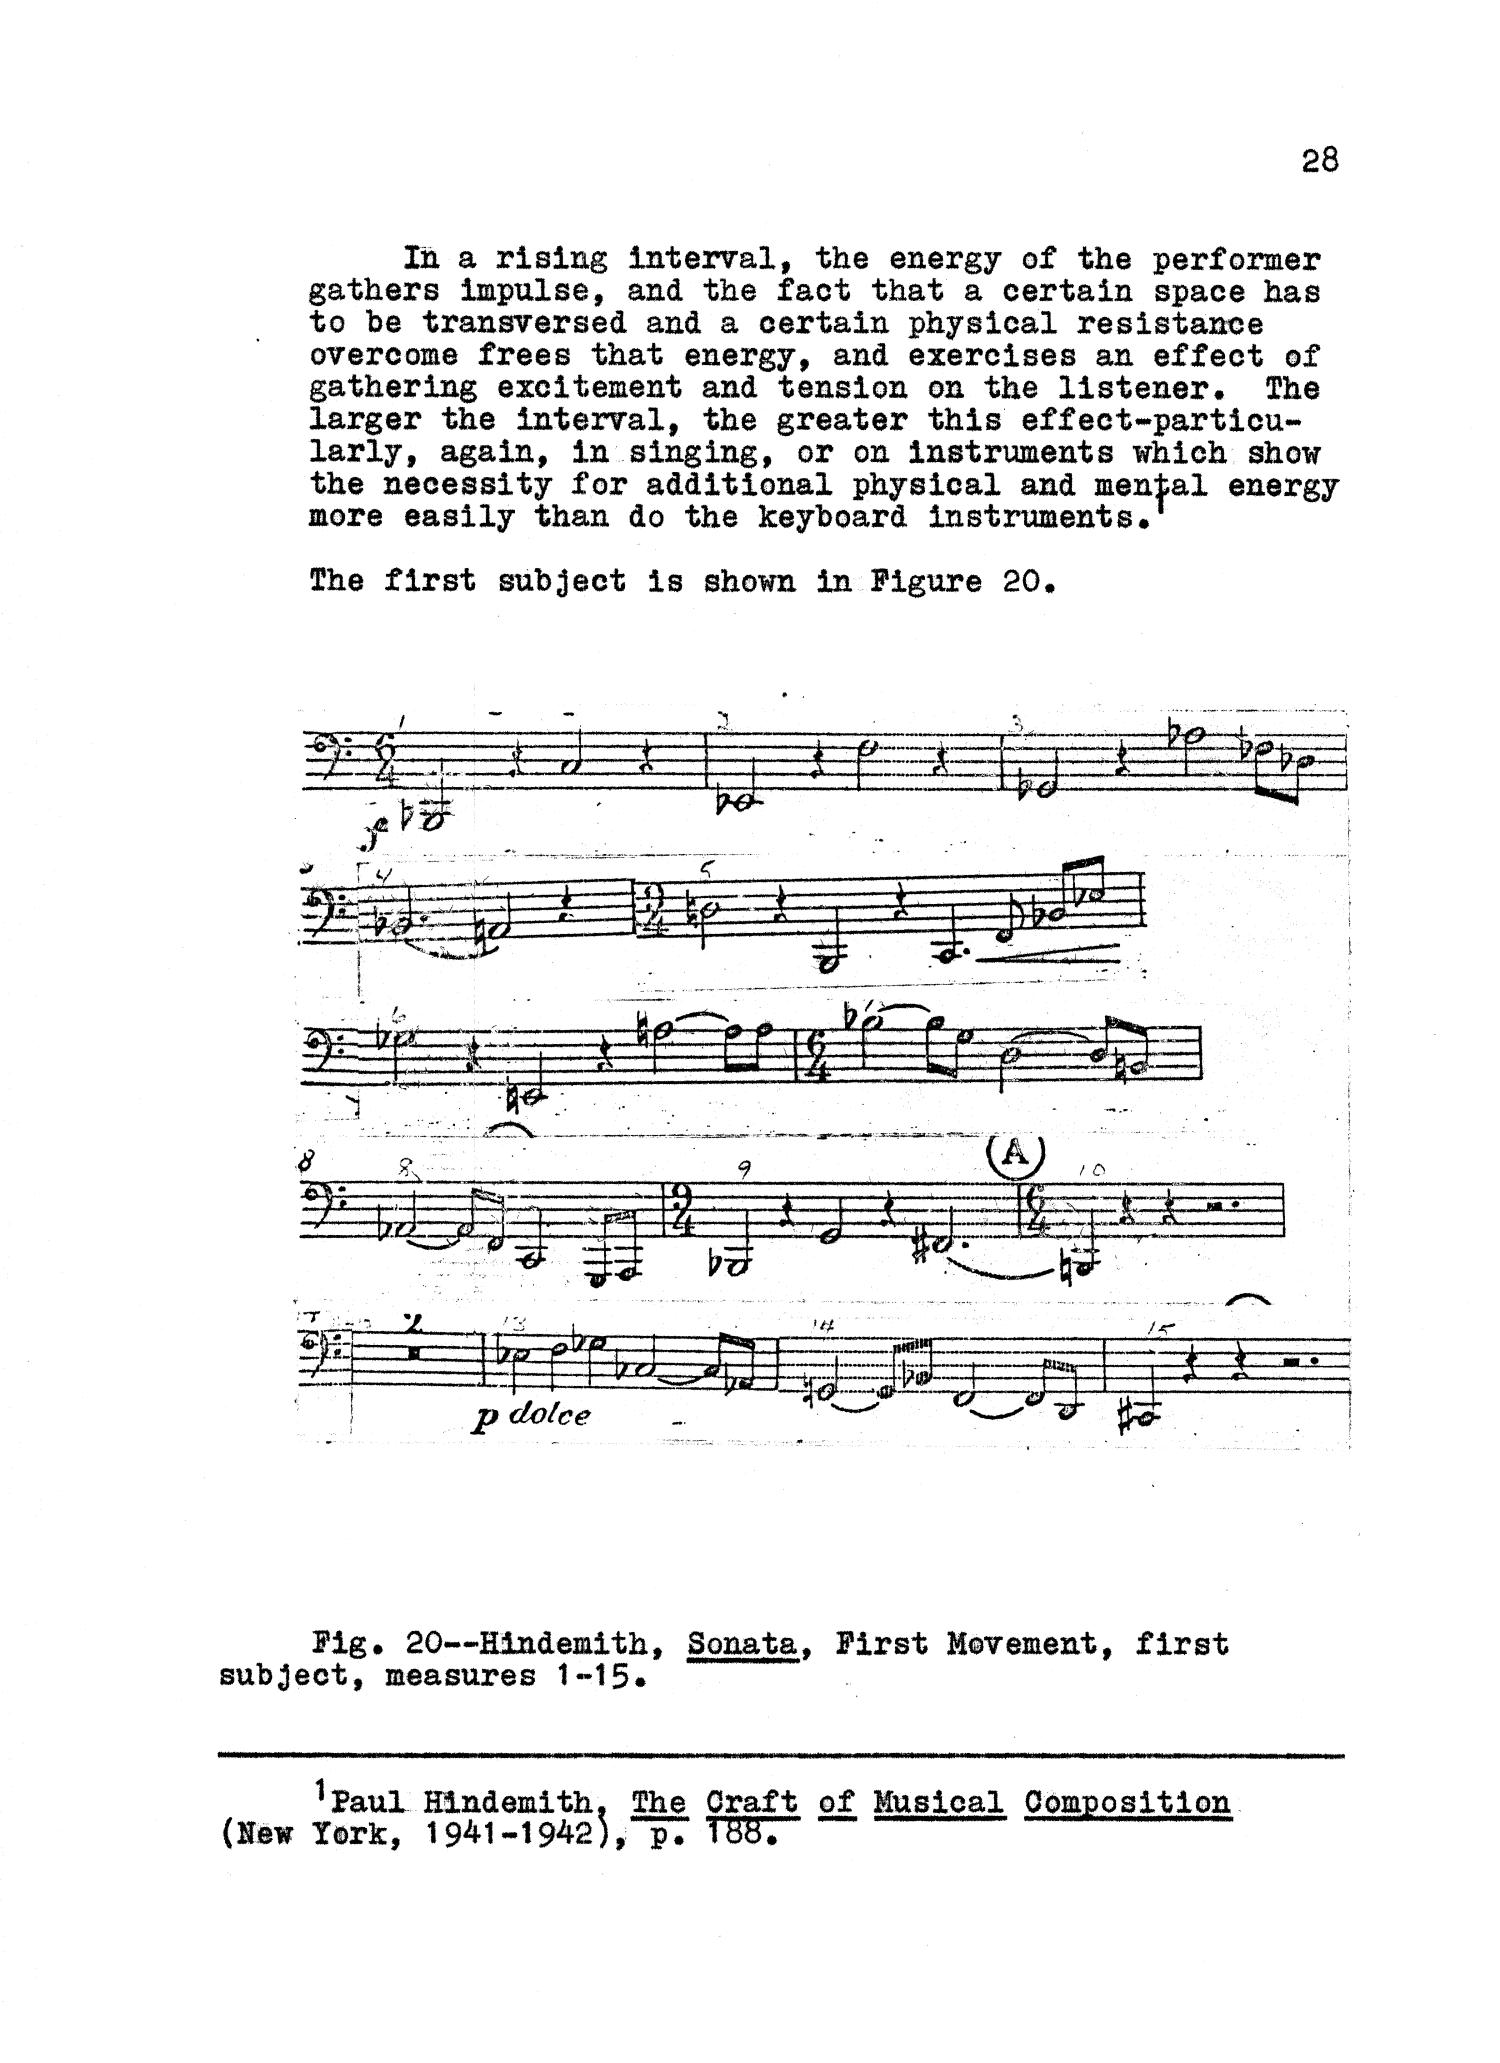 A Study of Four Solo Works for Tuba
                                                
                                                    28
                                                